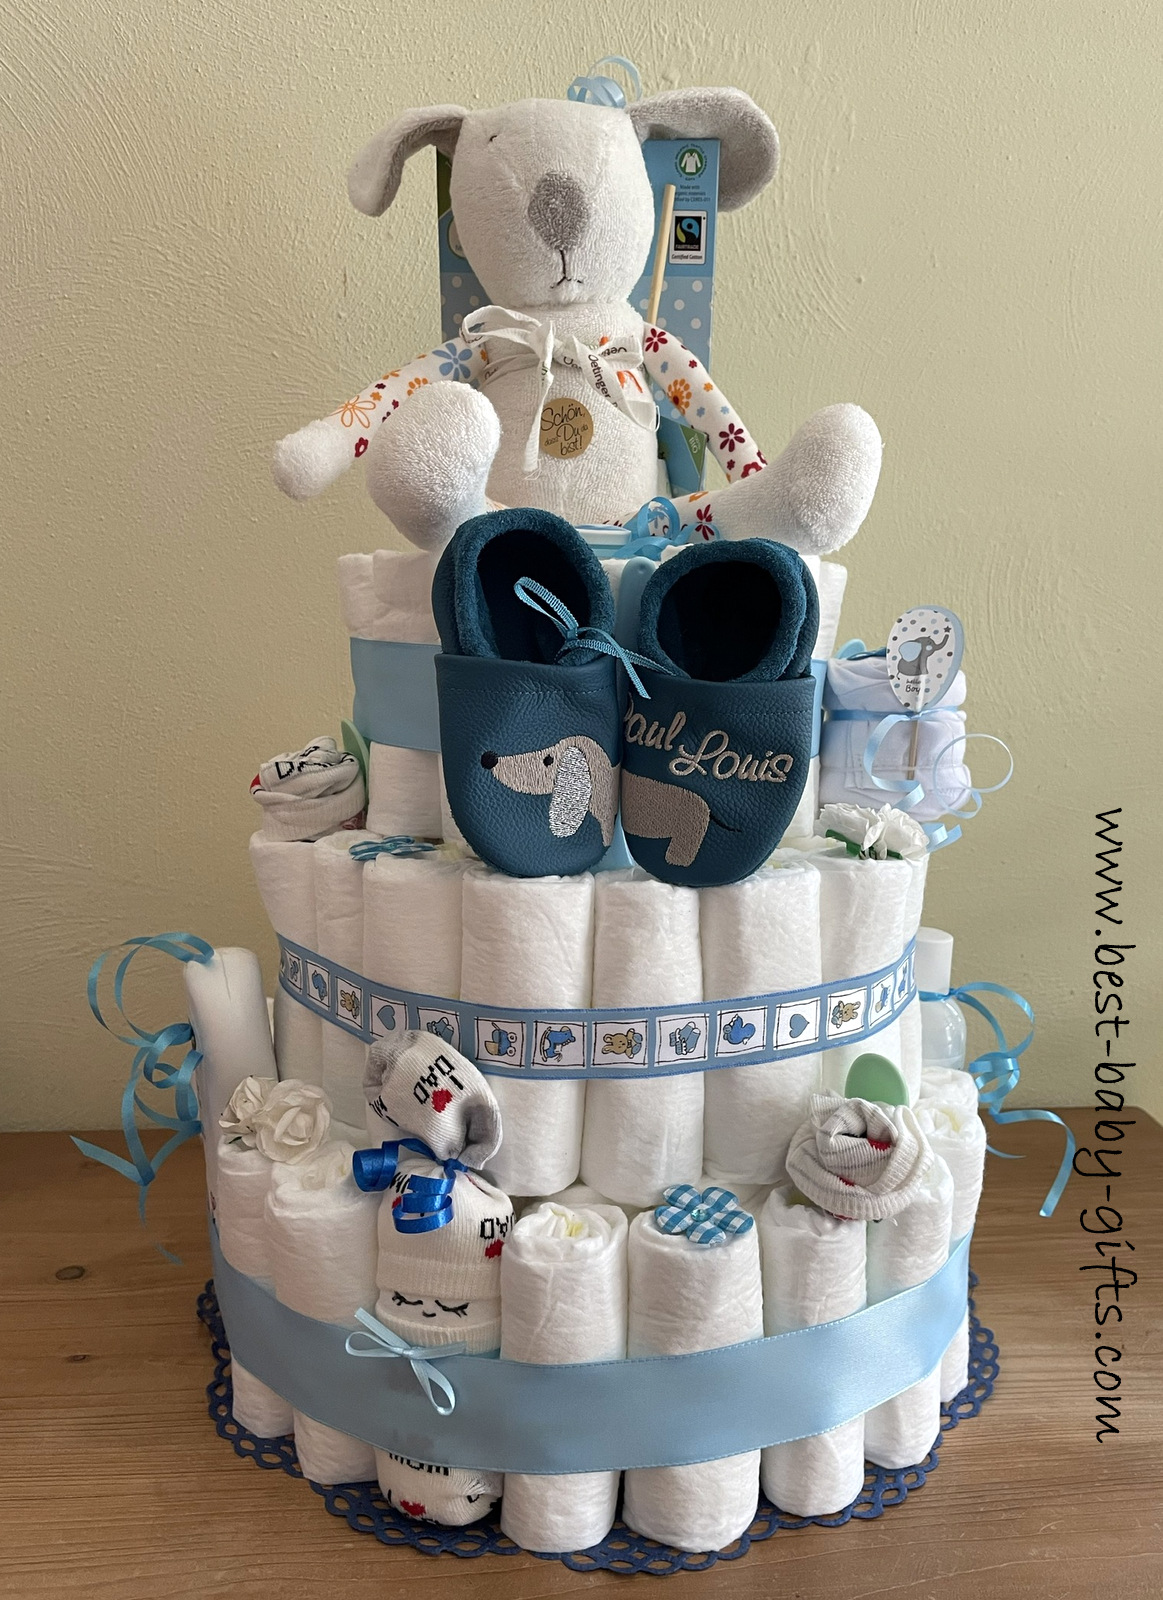 Hot Air Balloon Diaper Cake Tutorial + Free Printables! // Hostess with the  Mostess®